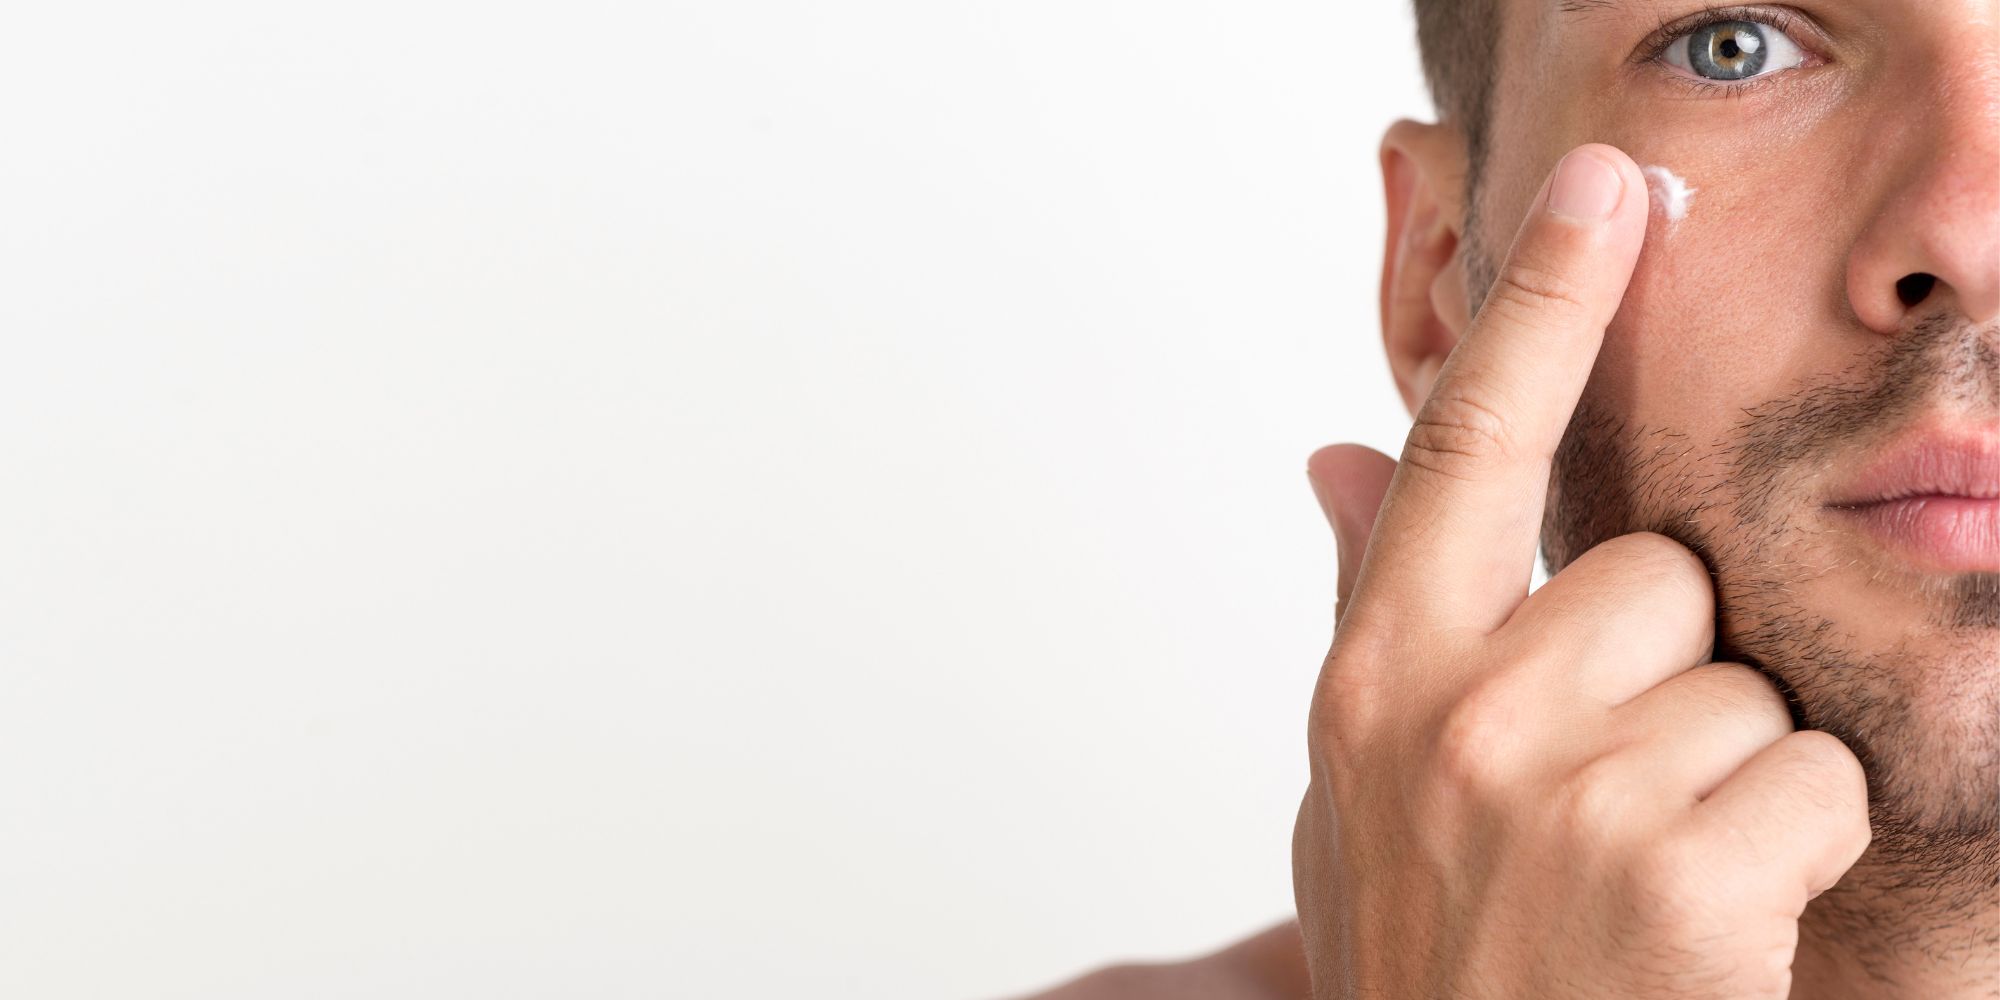 6 Common Men's Skincare Mistakes and How to Correct Them